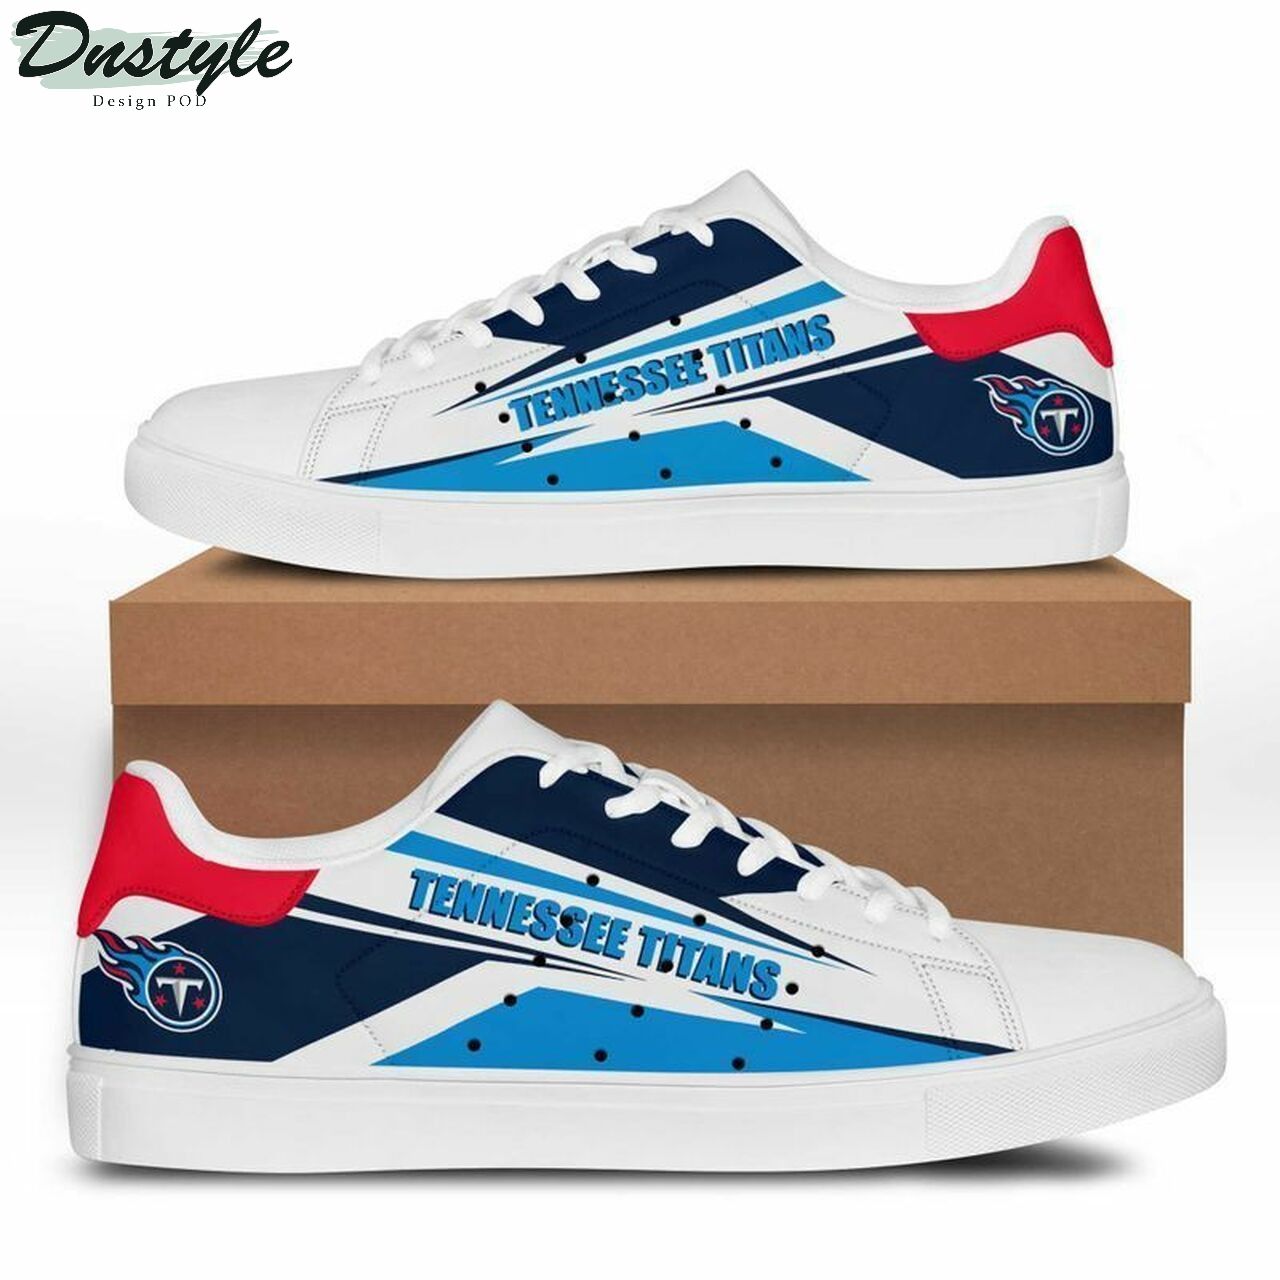 NFL Tennessee Titans stan smith low top skate shoes